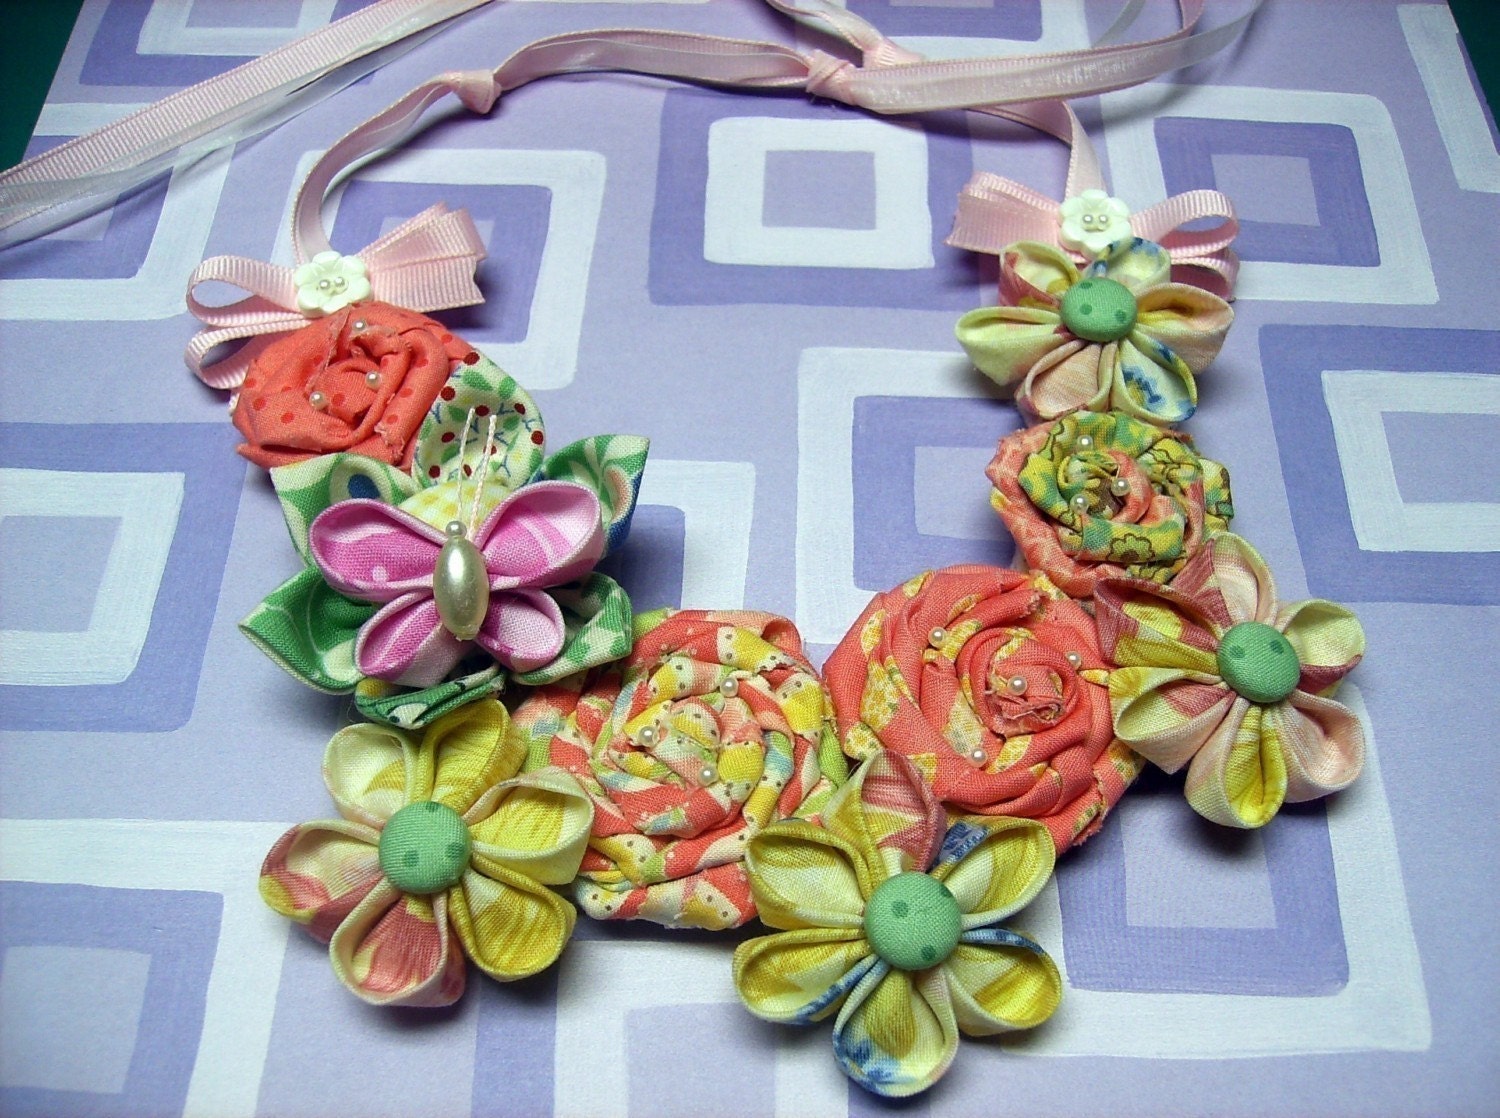 Fabric Flower Bib Necklace...PDF Tutorial...Make Your Own Handmade Statement...Includes All 3 Flowers